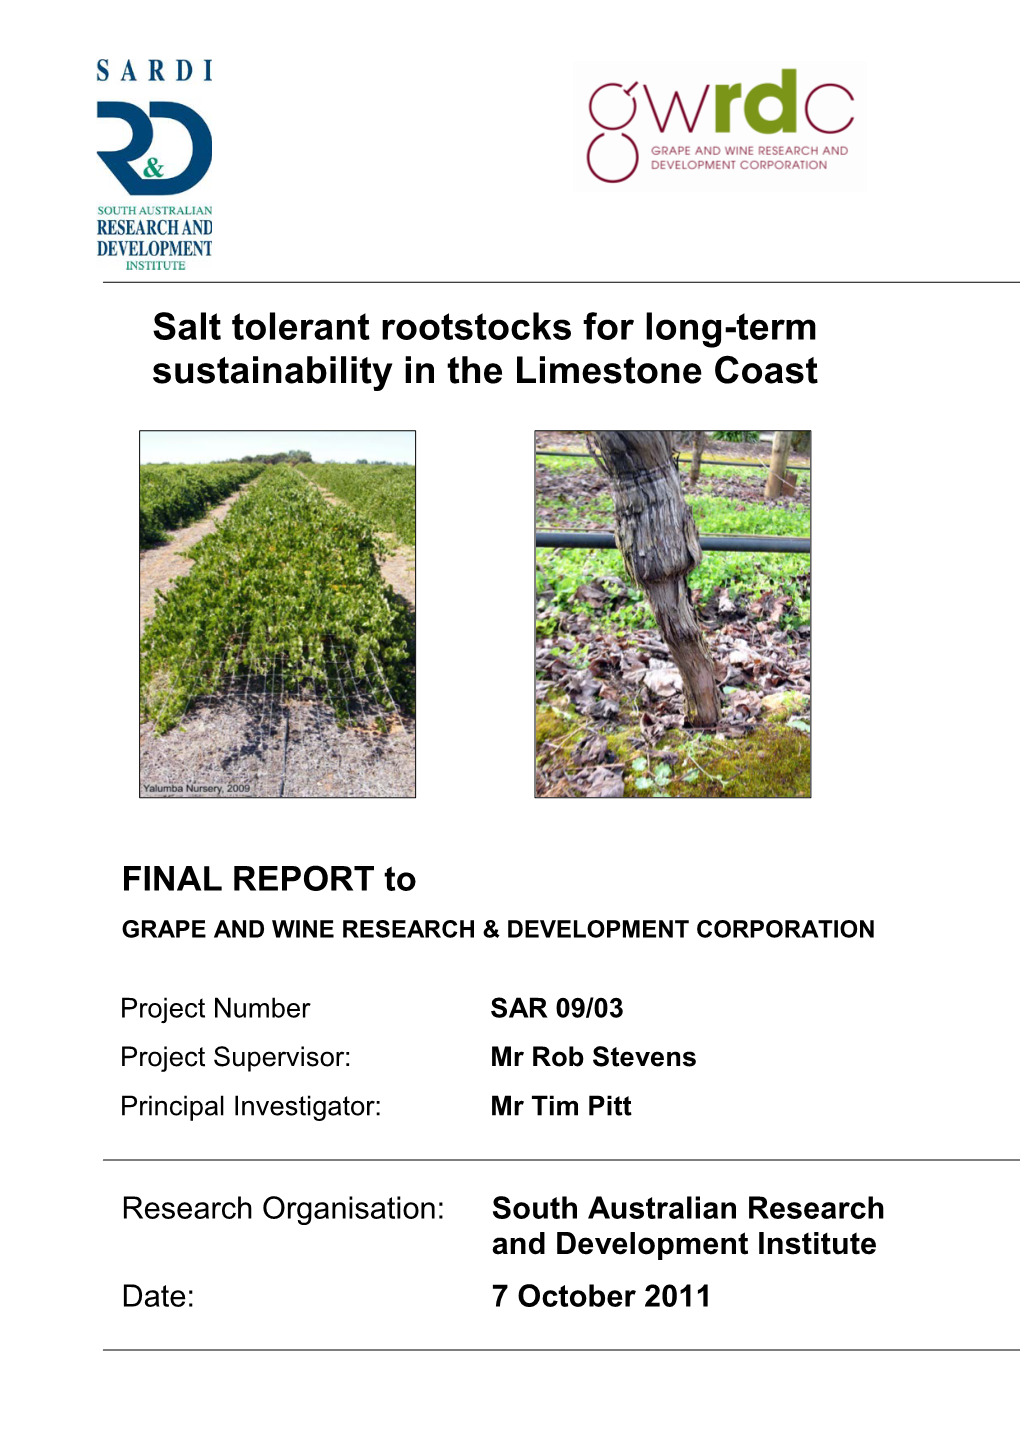 Salt Tolerant Rootstocks for Long-Term Sustainability in the Limestone Coast